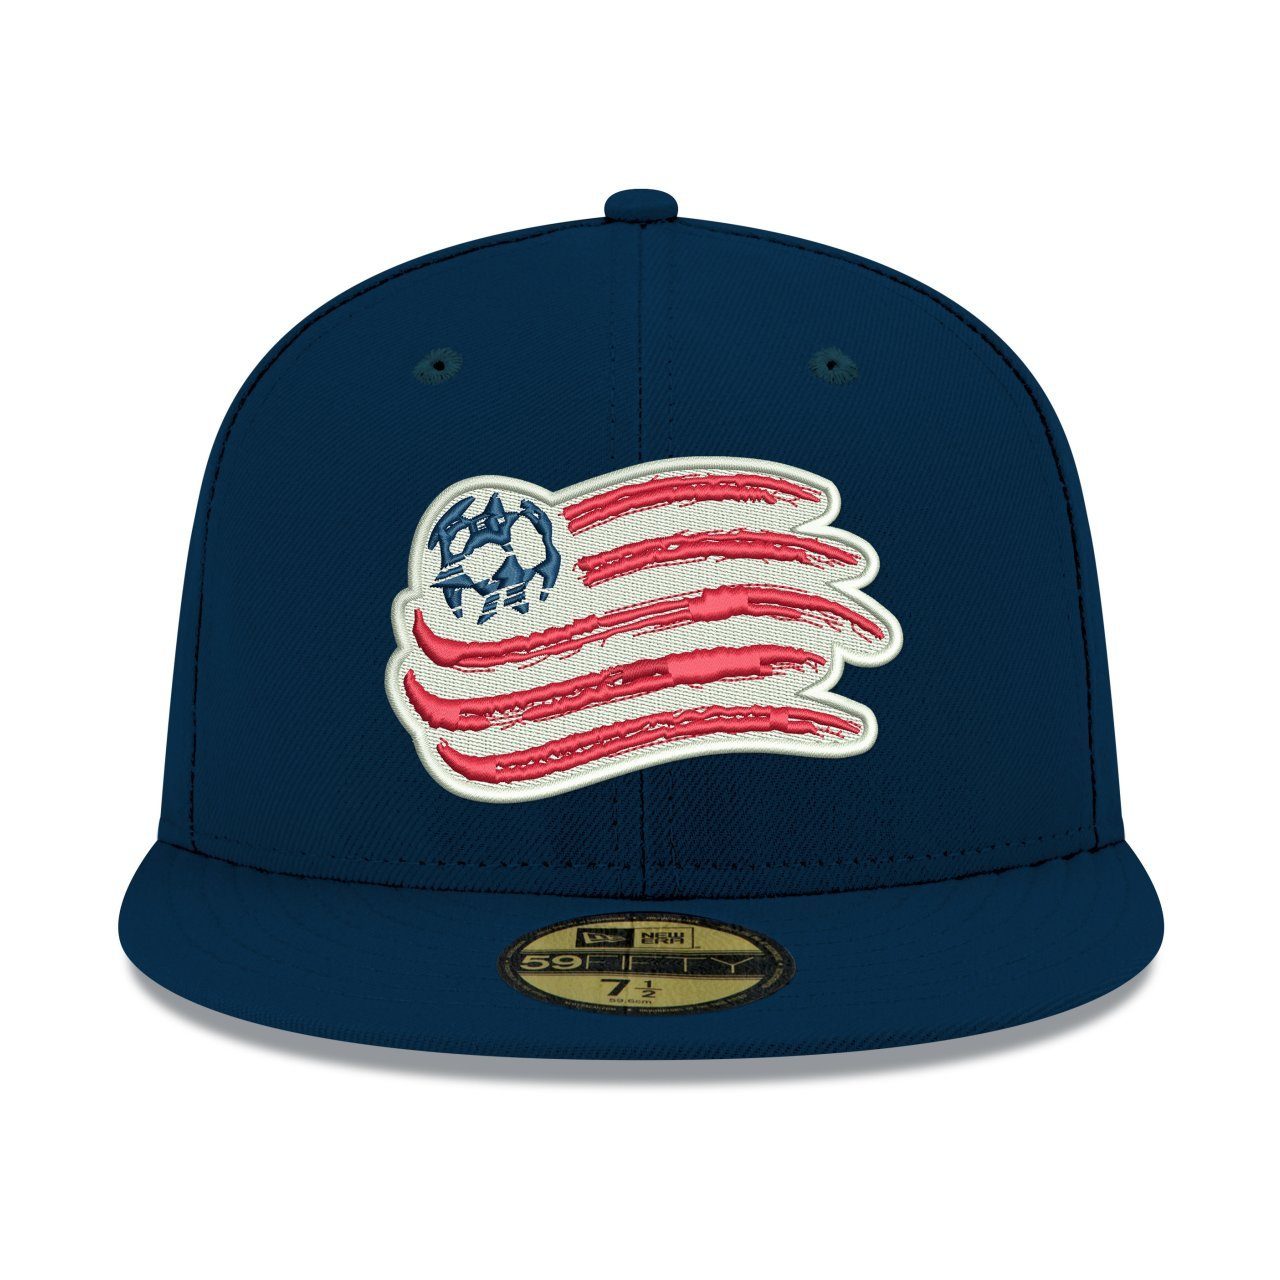 New England 59Fifty Cap Fitted MLS Era New Revolution